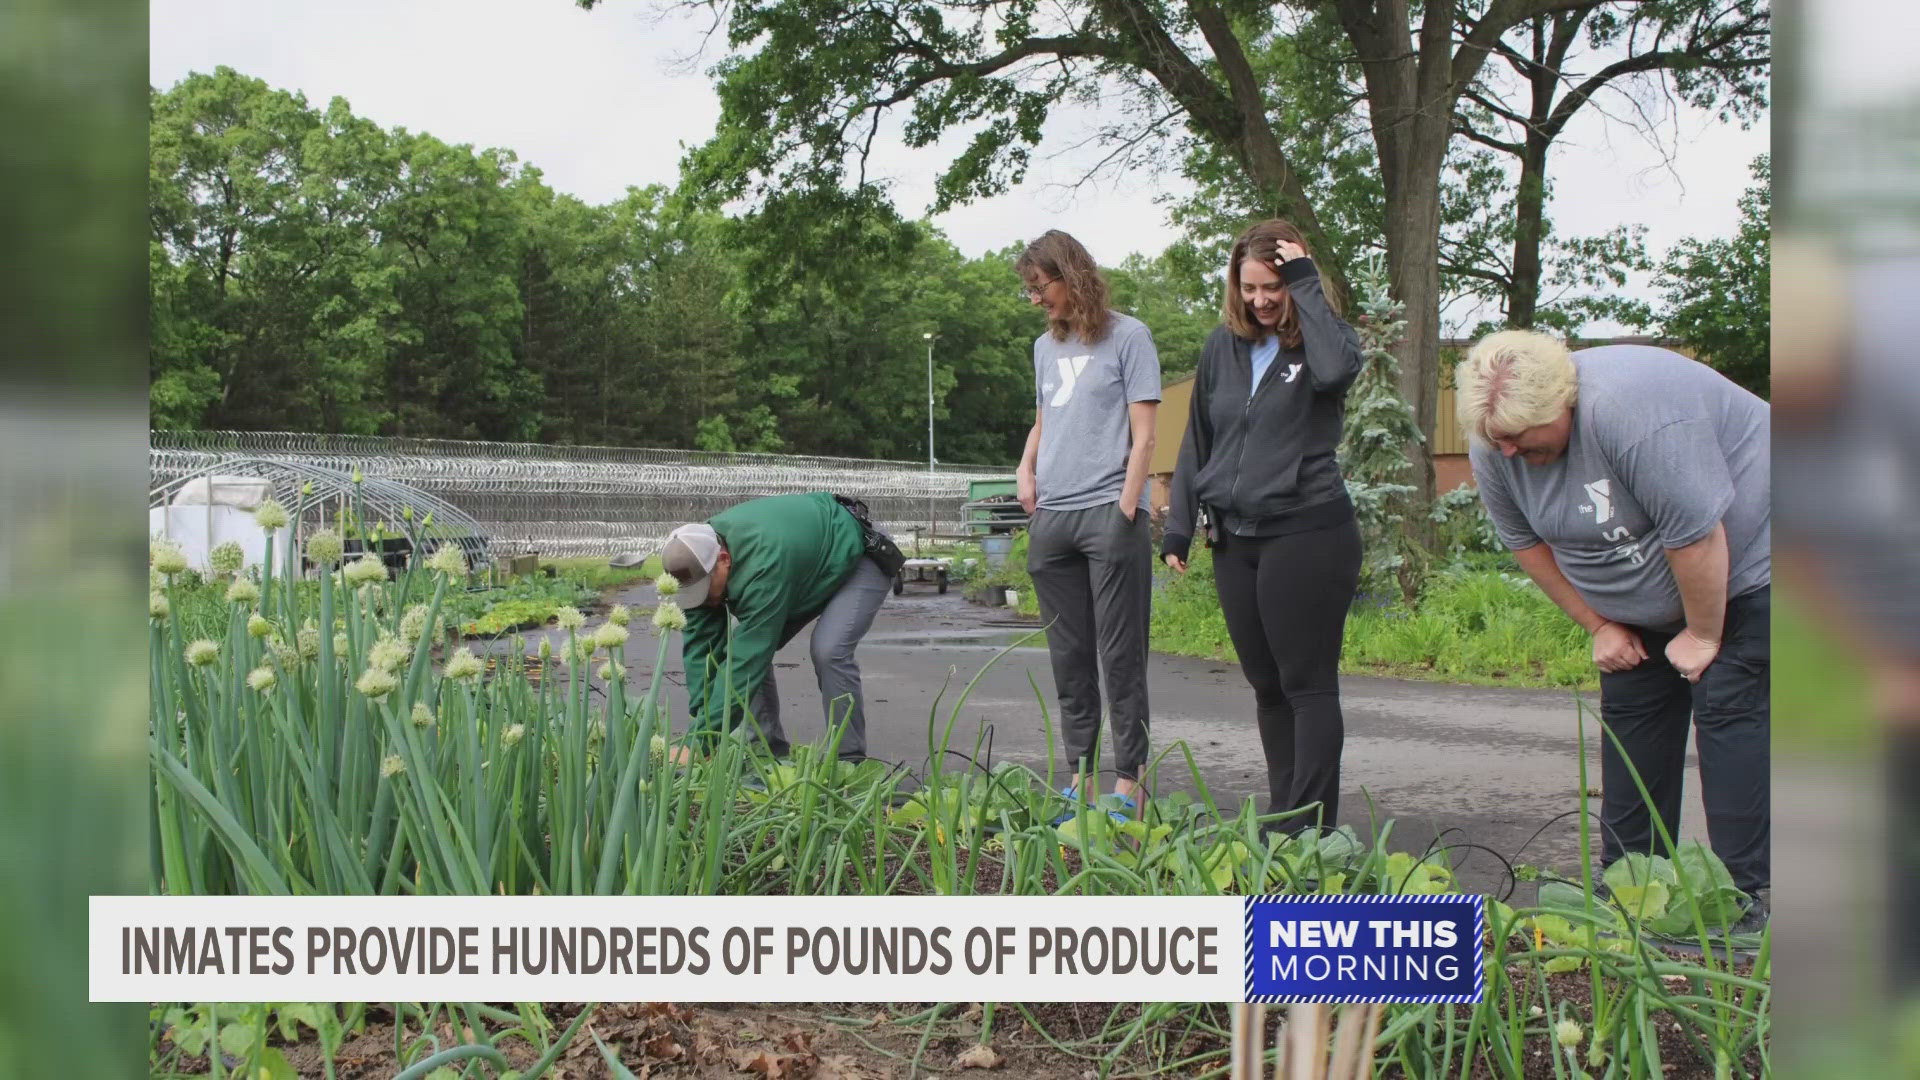 Inmates at the Muskegon Correctional Facility are helping to grow thousands of pounds of produce—and it’s all going right into the community.